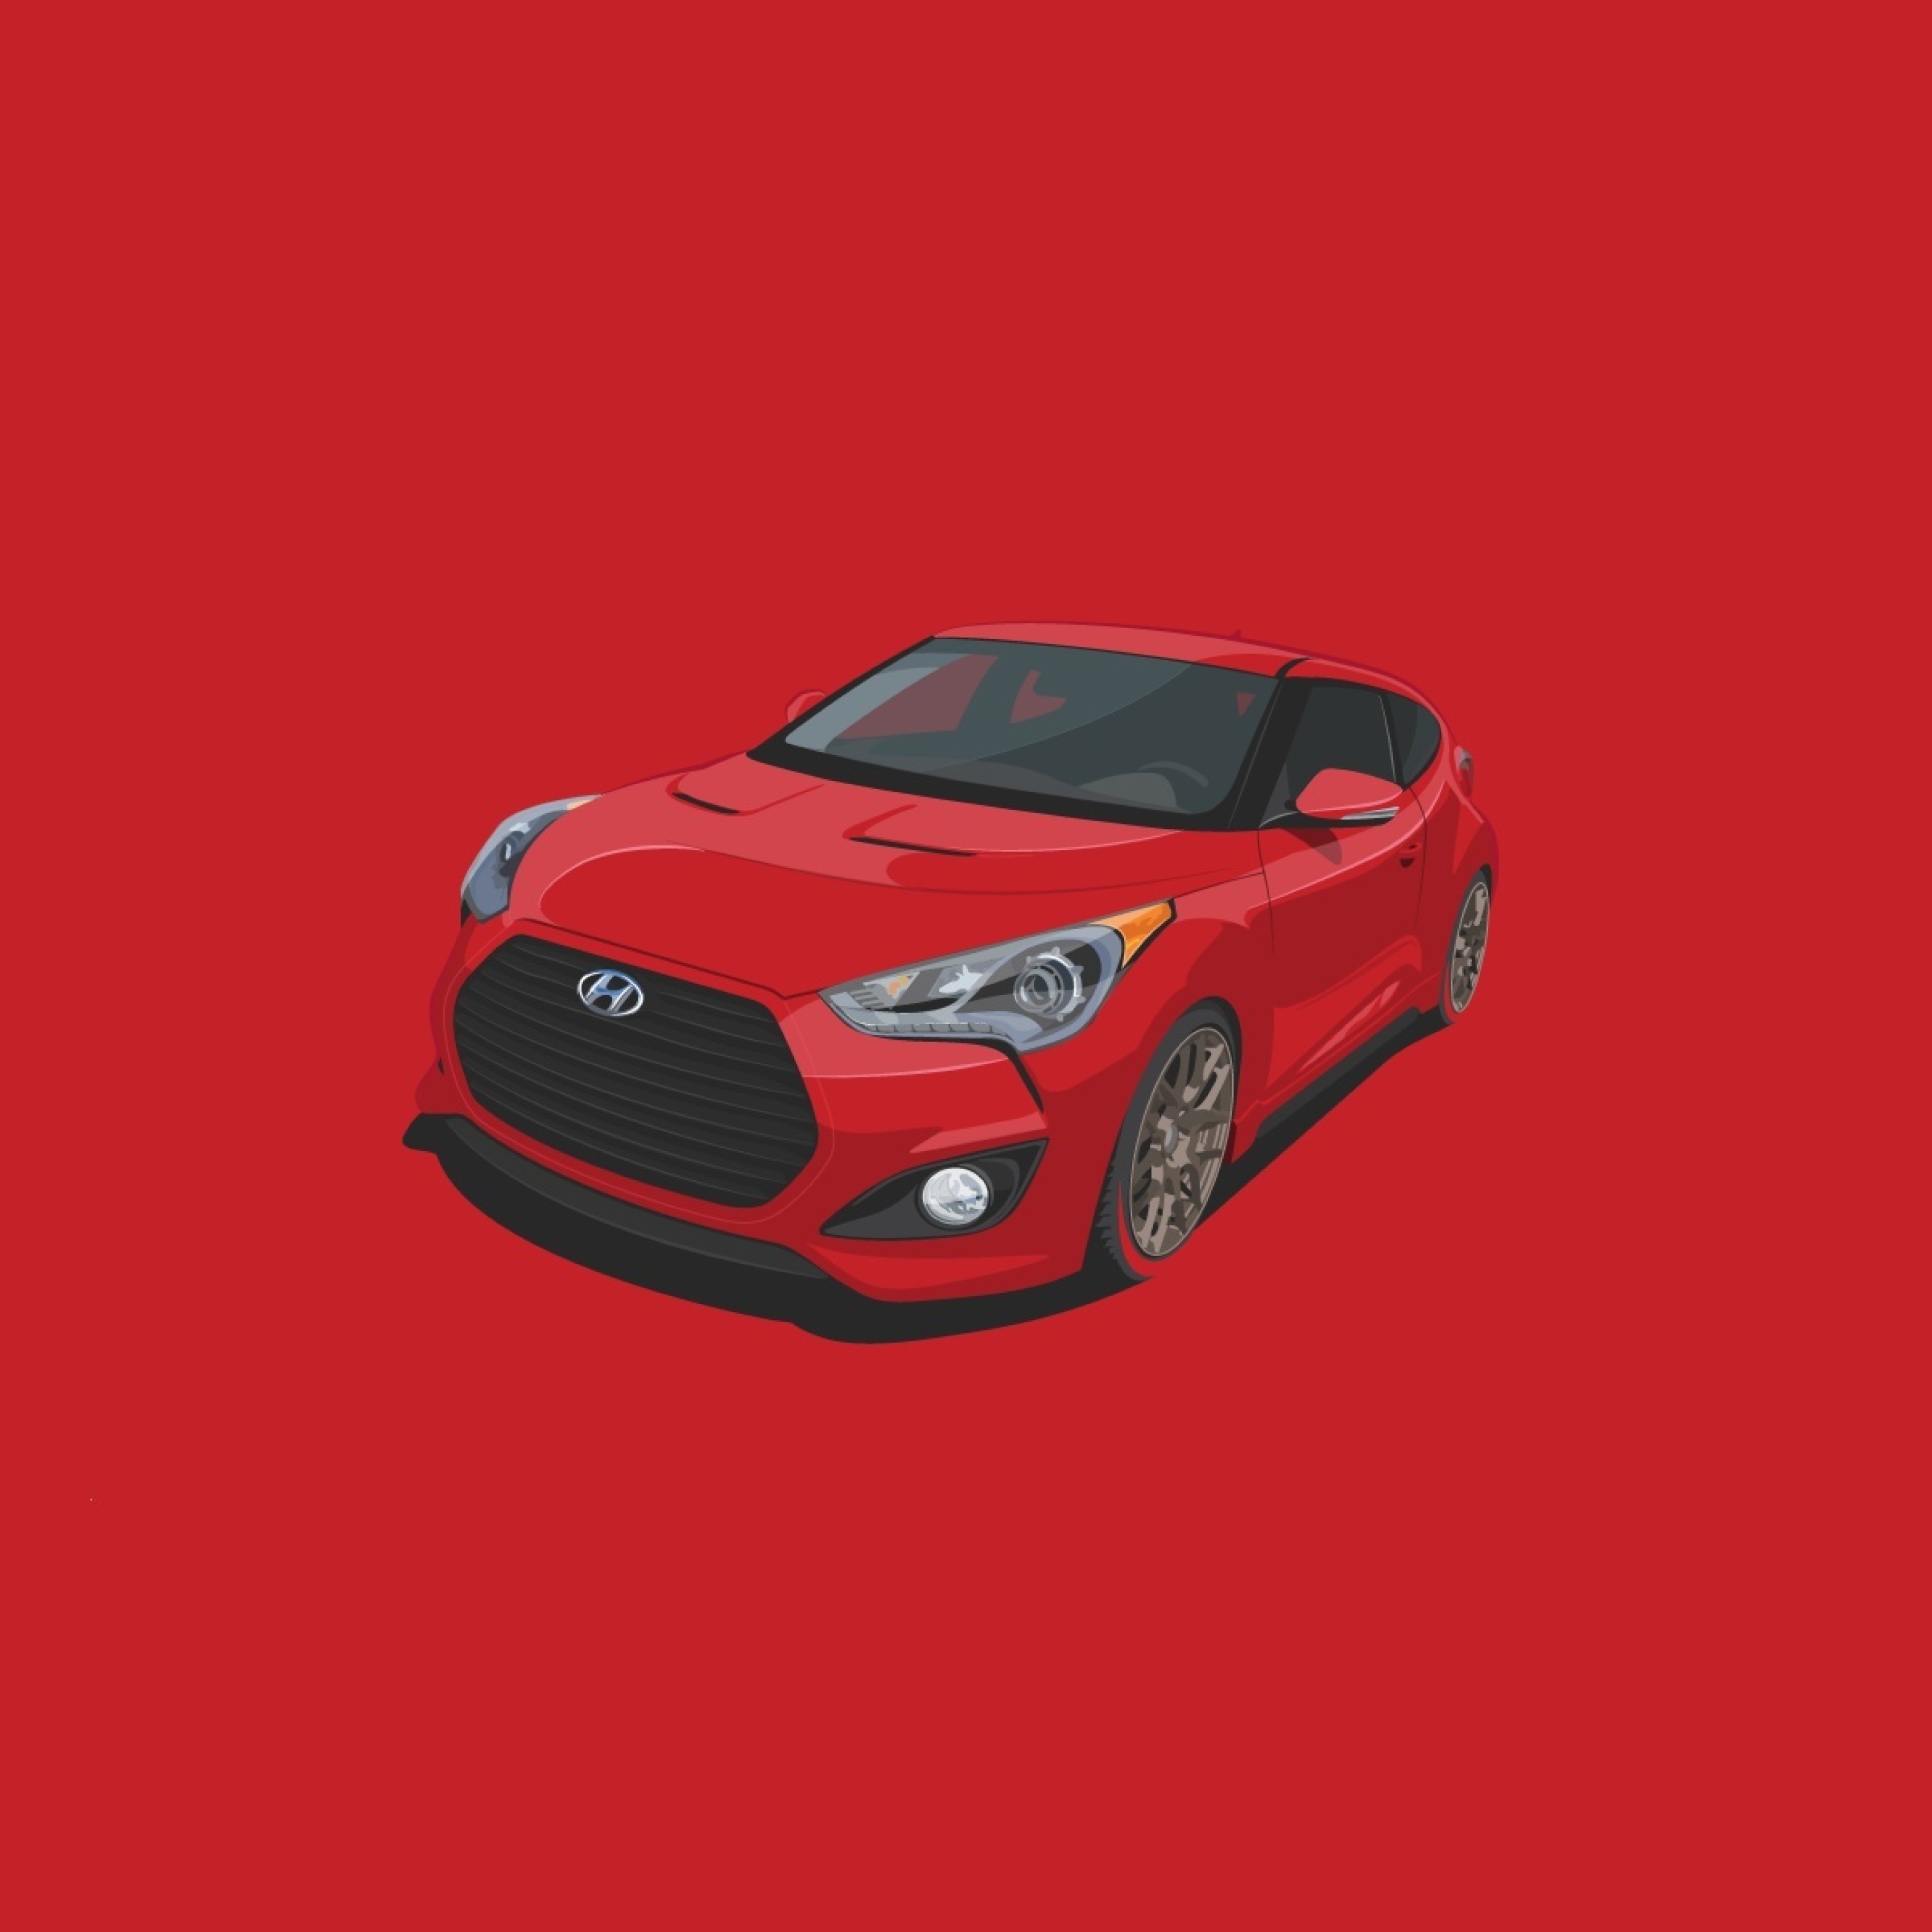 2932x2932 Hyundai Veloster Red Ipad Pro Retina Display Wallpaper Hd Vector 4k Wallpapers Images Photos And Background Wallpapers Den